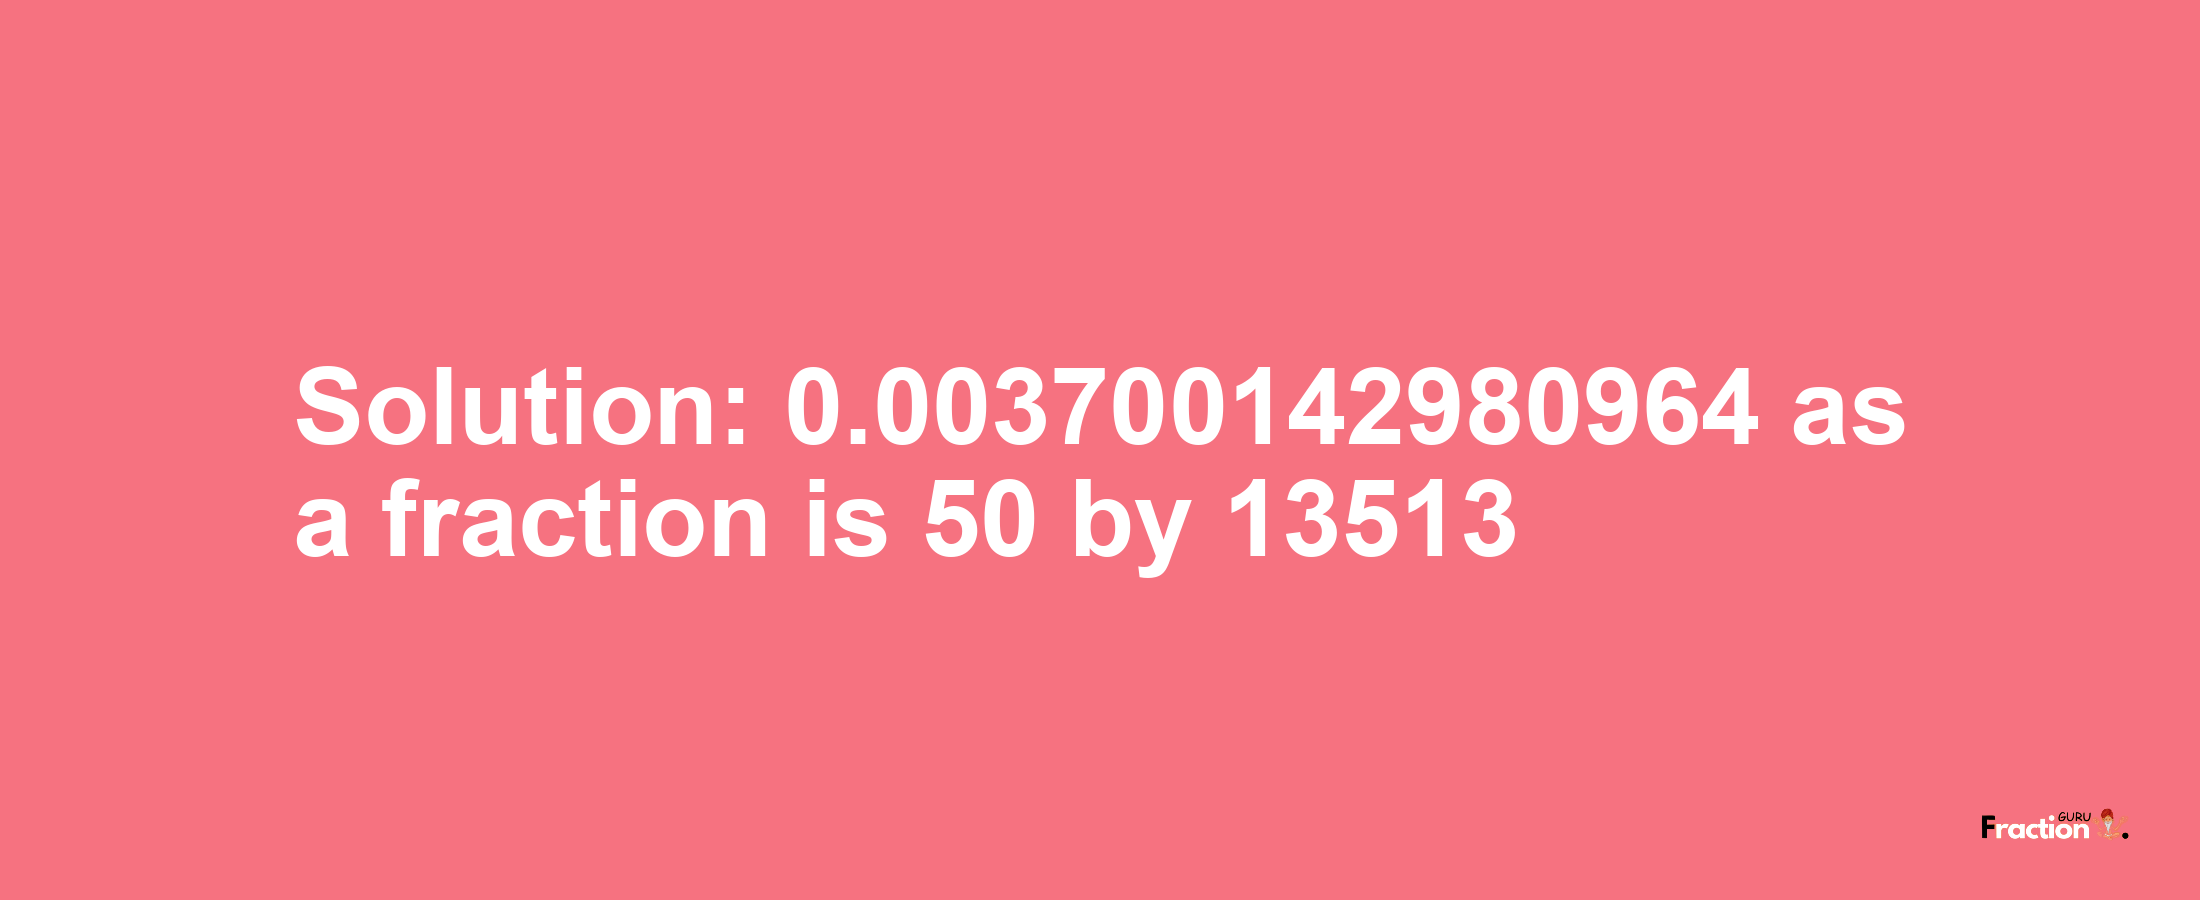 Solution:0.003700142980964 as a fraction is 50/13513